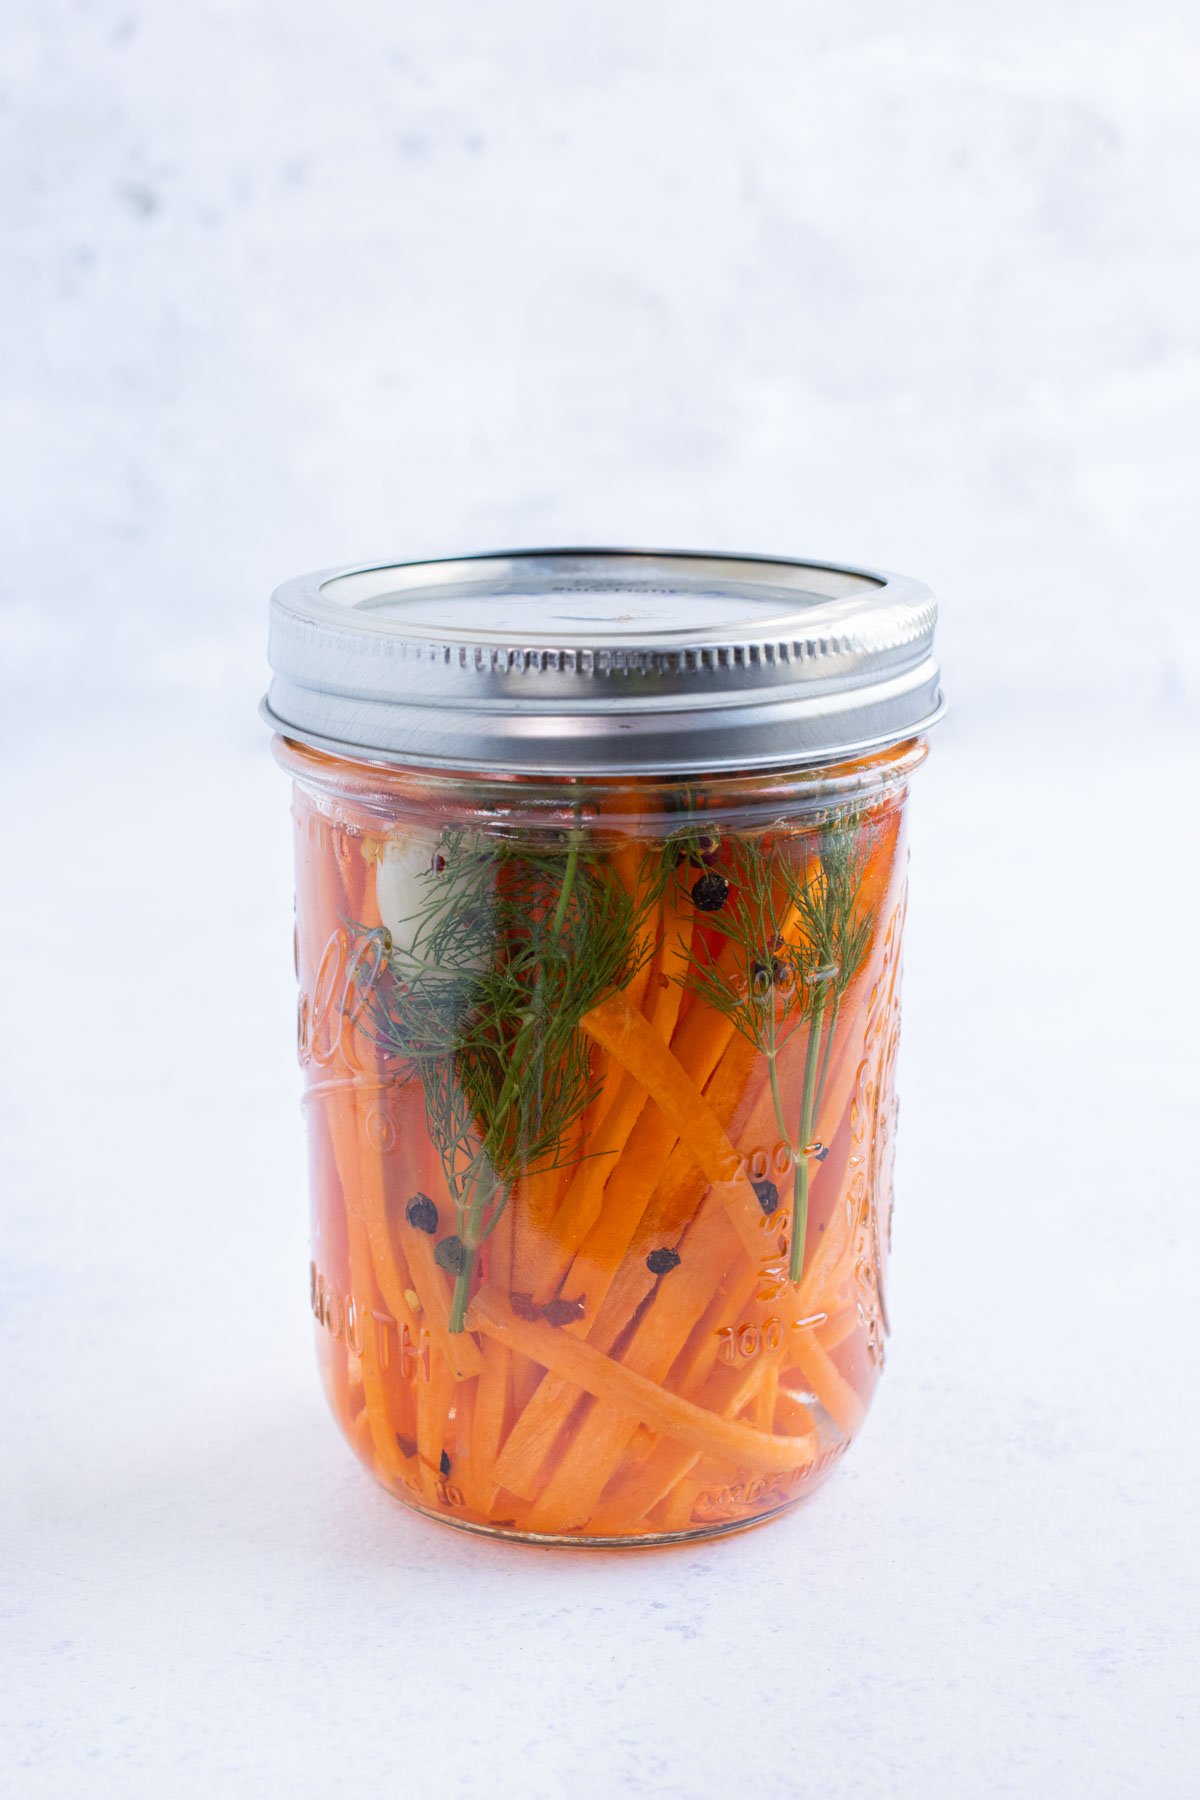 A lid is sealed onto a jar with carrots, dill, garlic, and peppercorns.